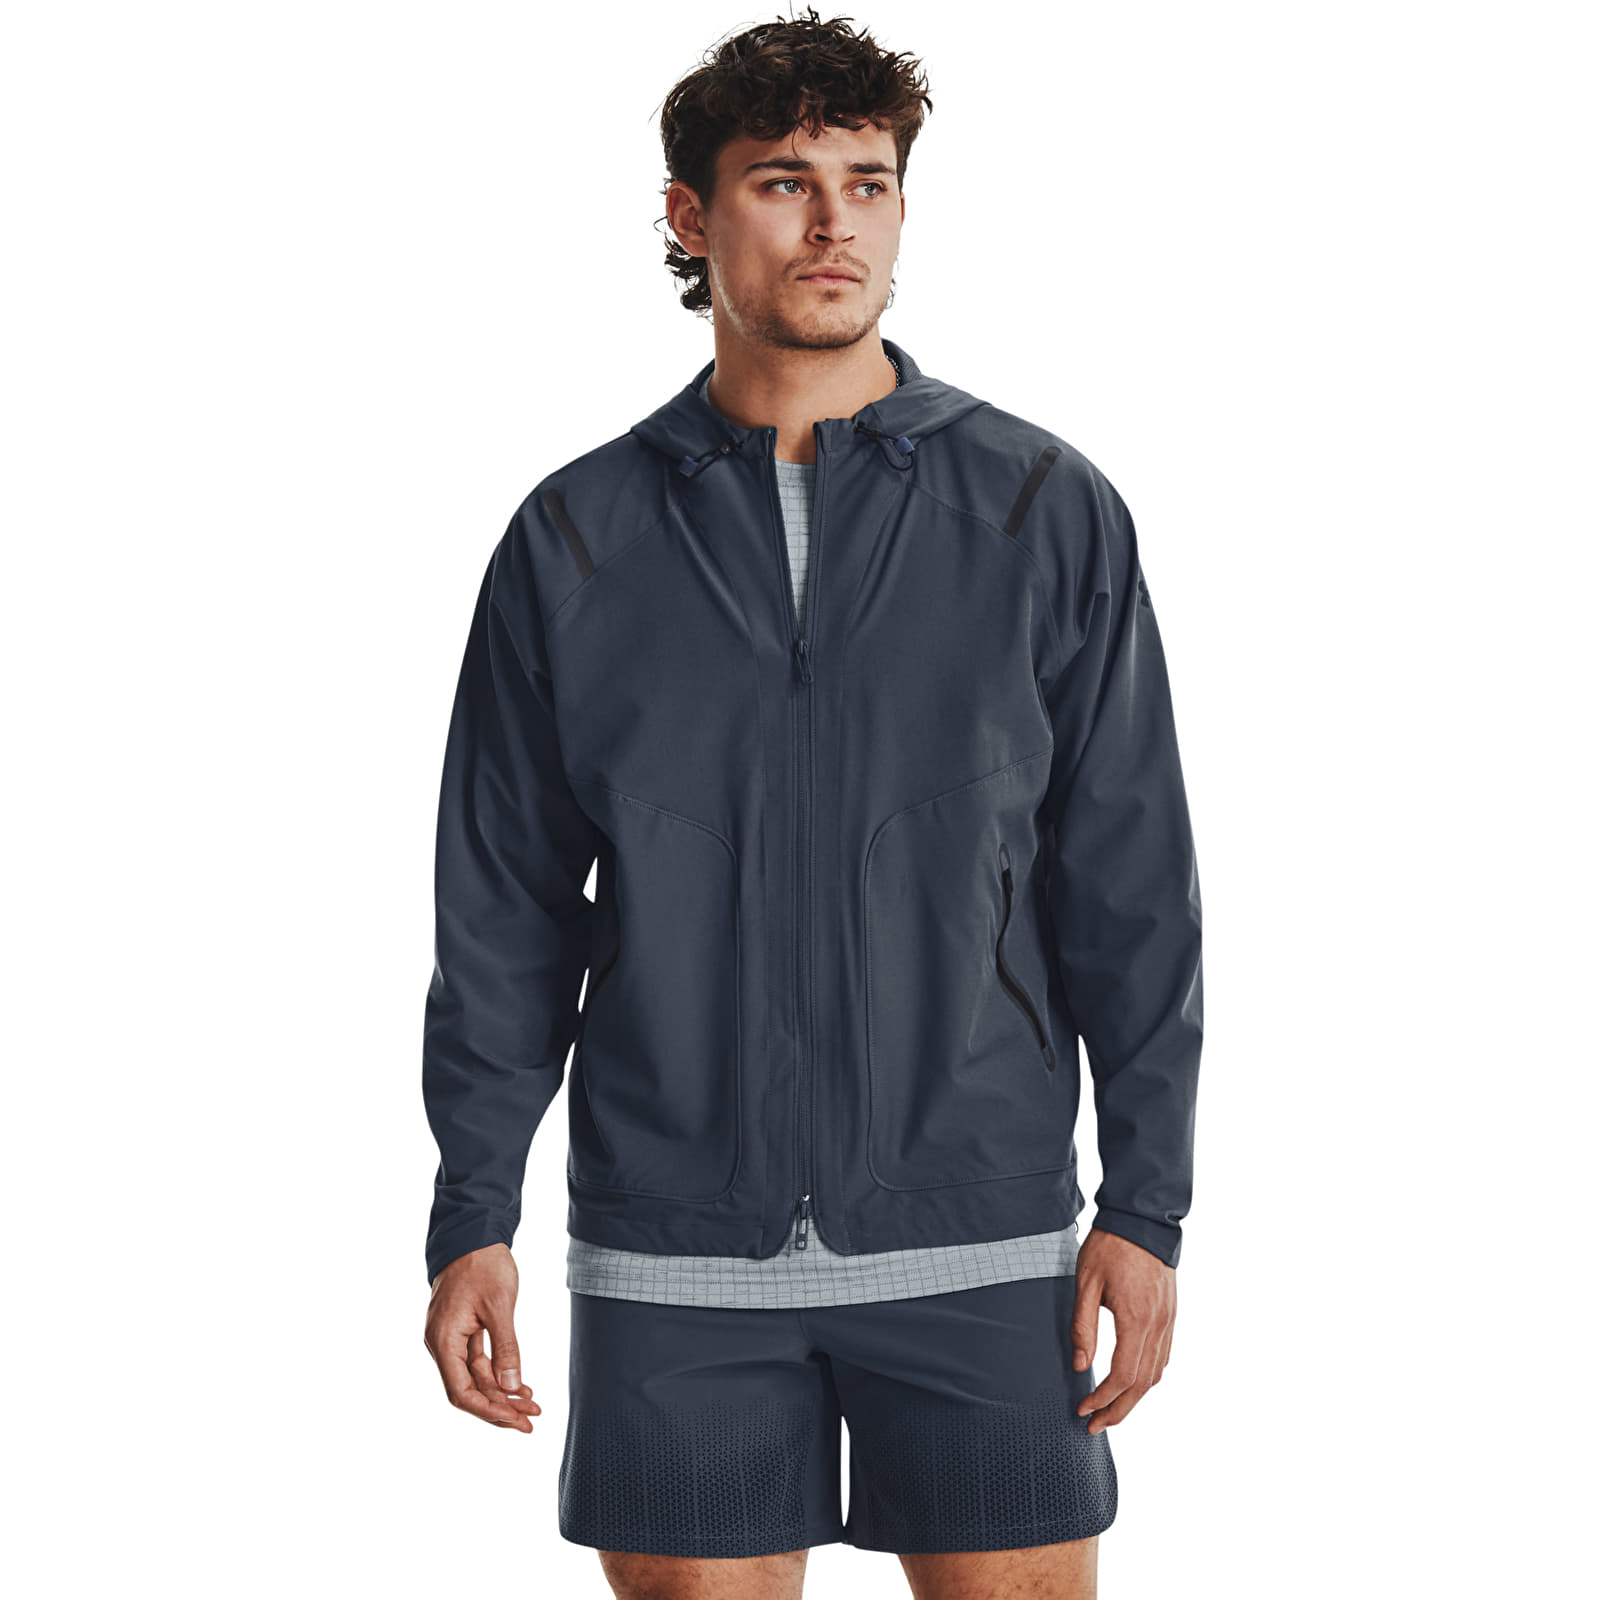 Якета Under Armour Unstoppable Jacket Gray